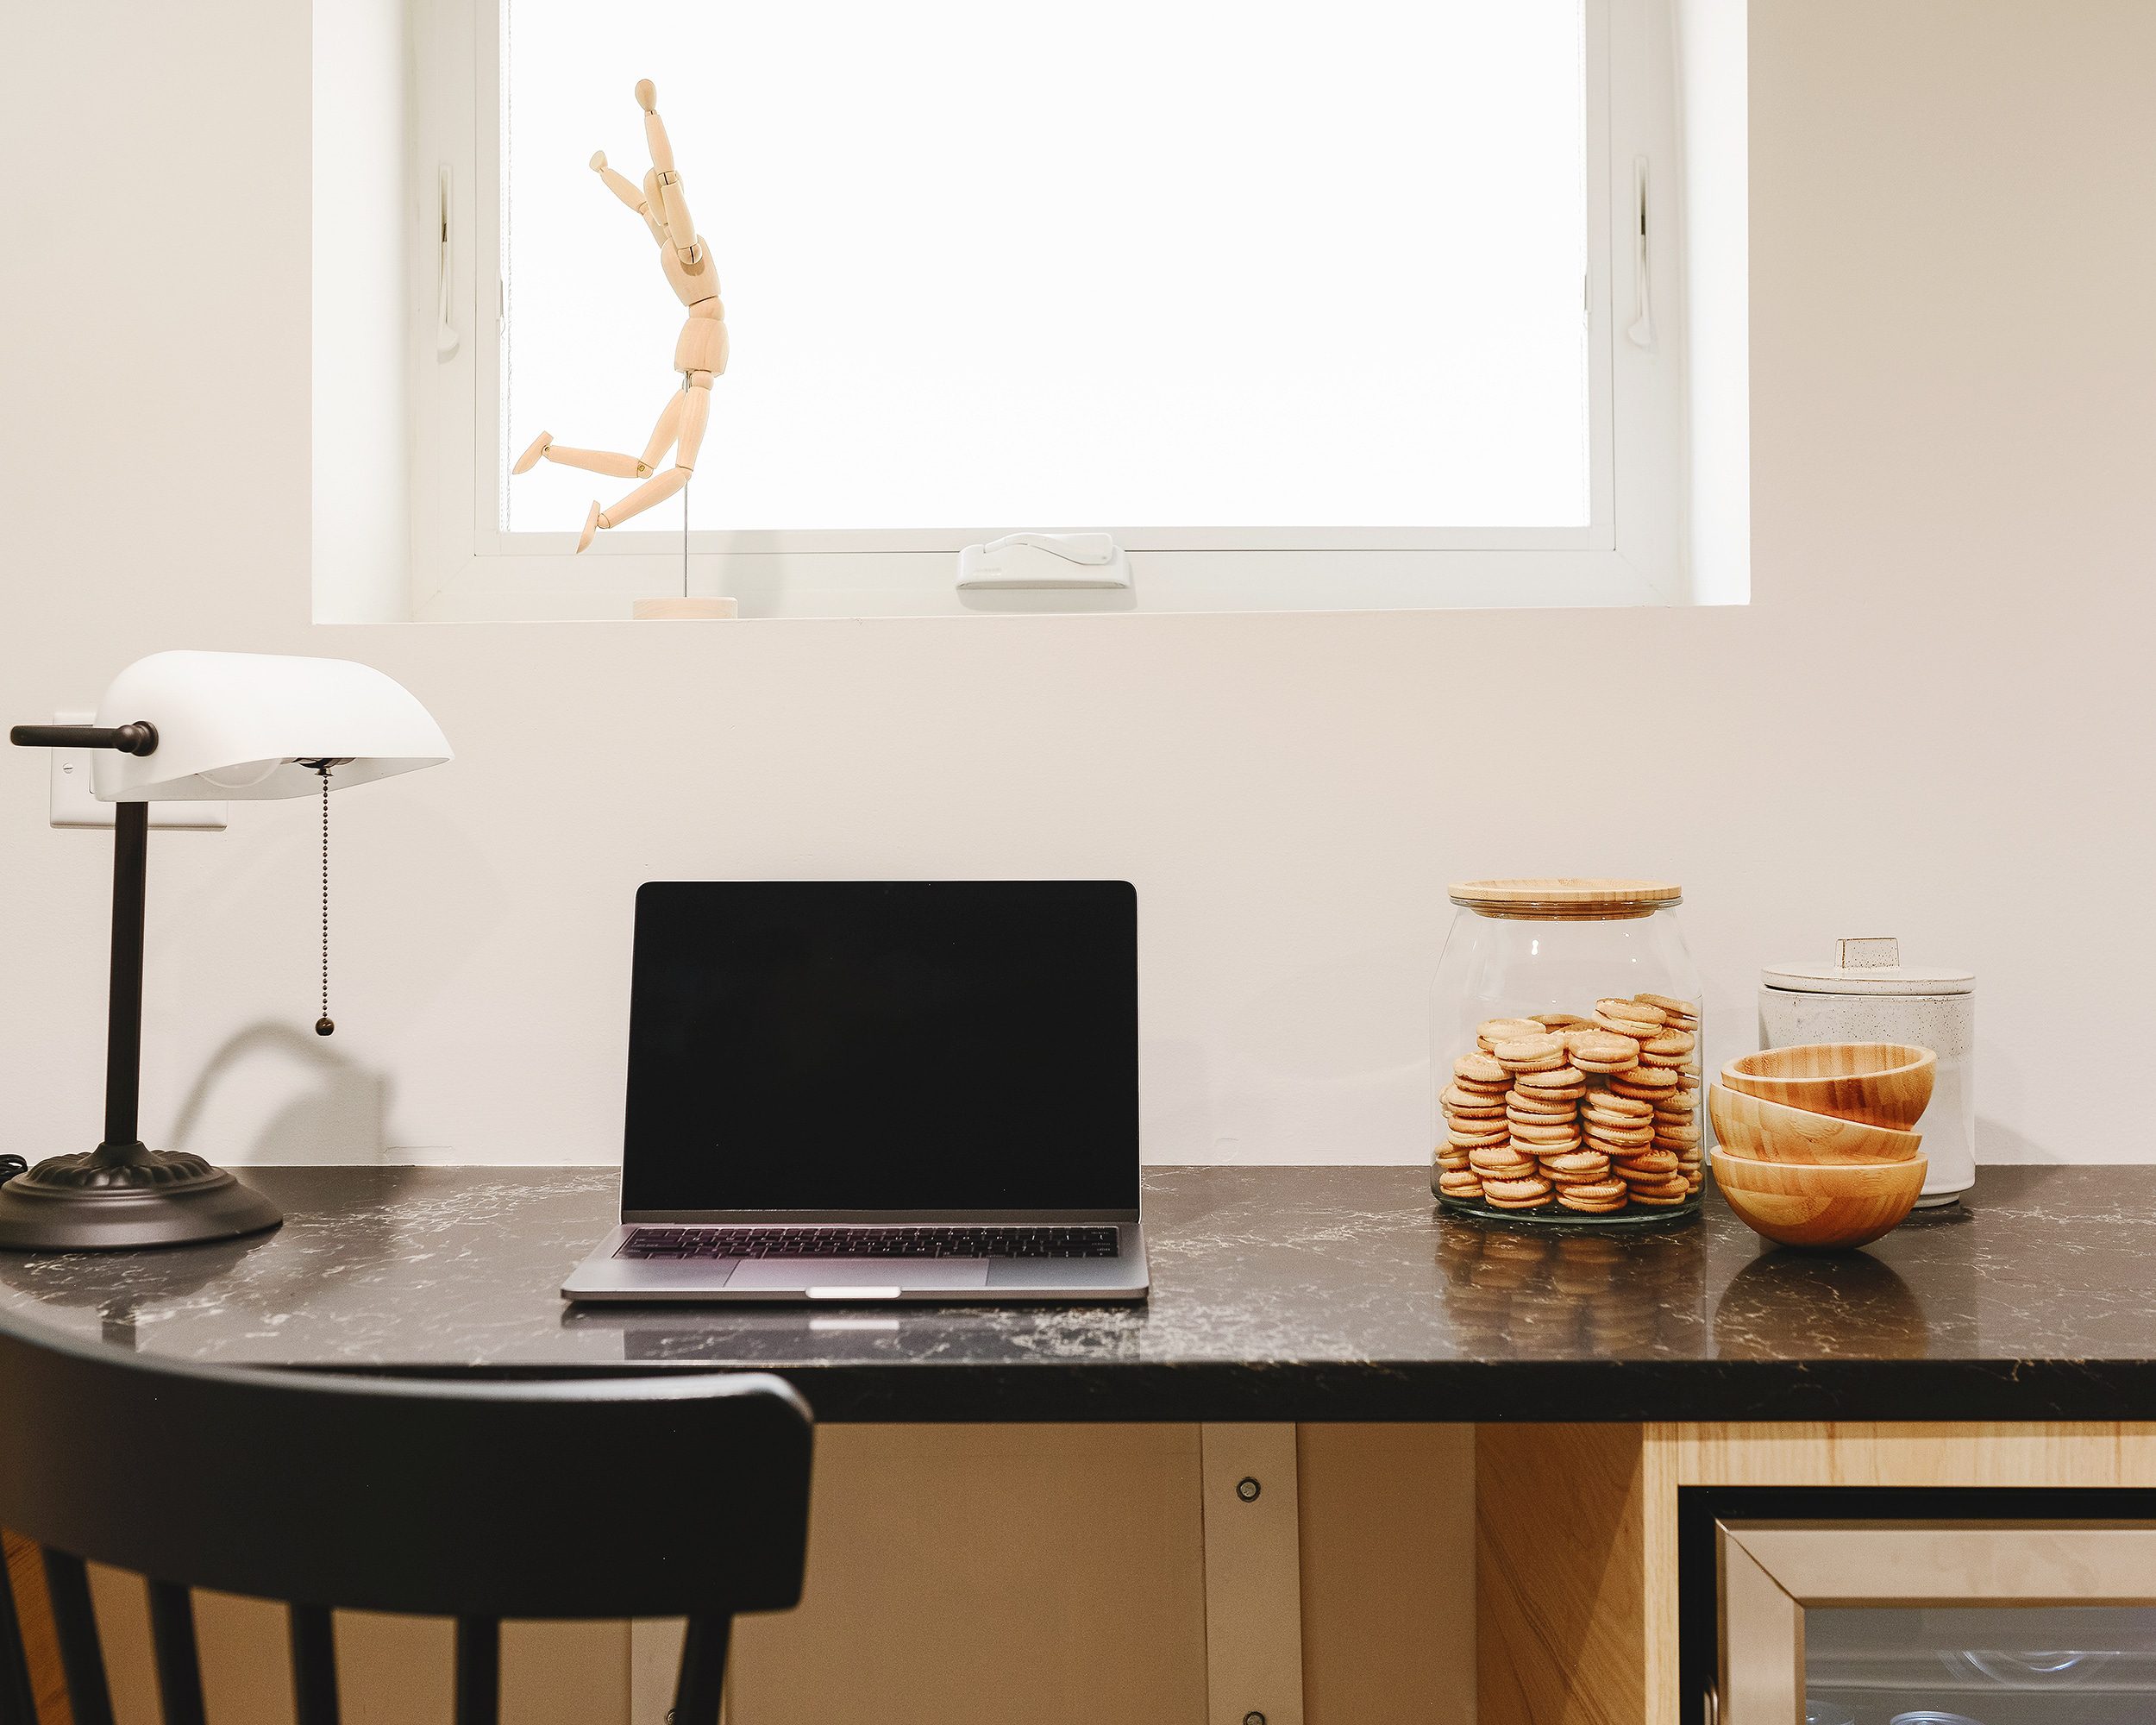 The workstation in our IKEA kitchenette | via Yellow Brick Home